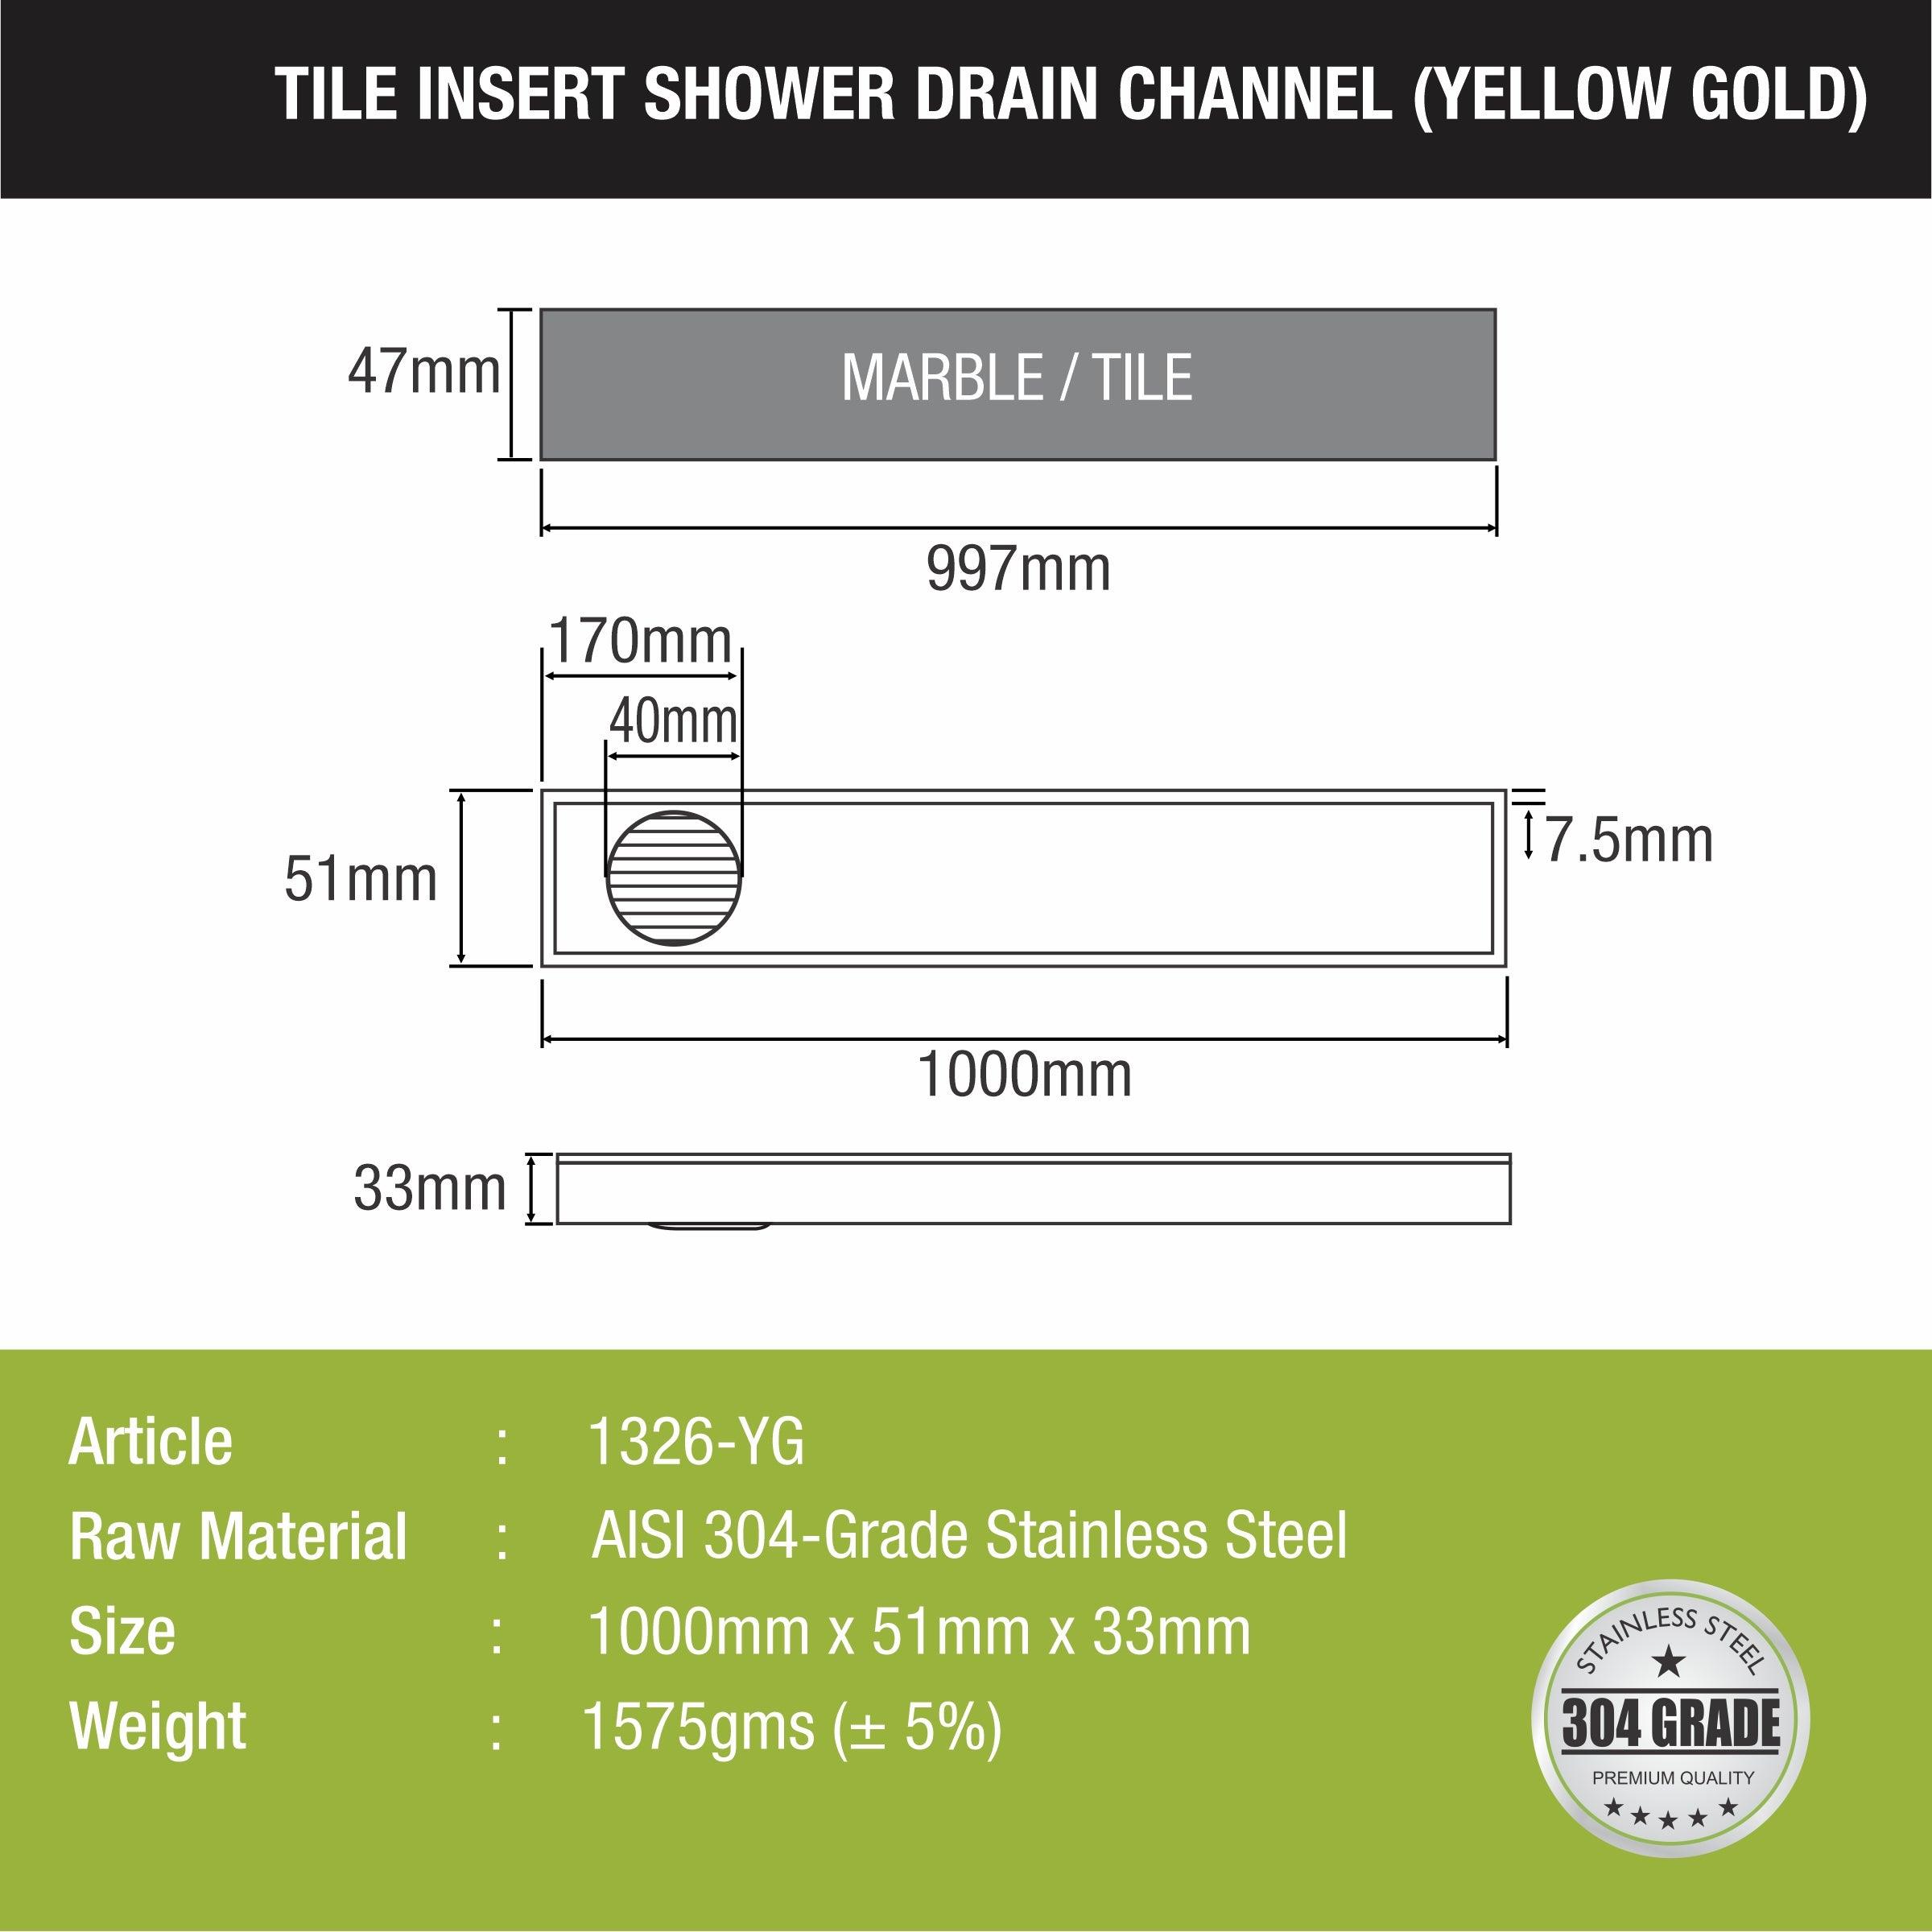 Tile Insert Shower Drain Channel - Yellow Gold (40 x 2 Inches) sizes and dimensions